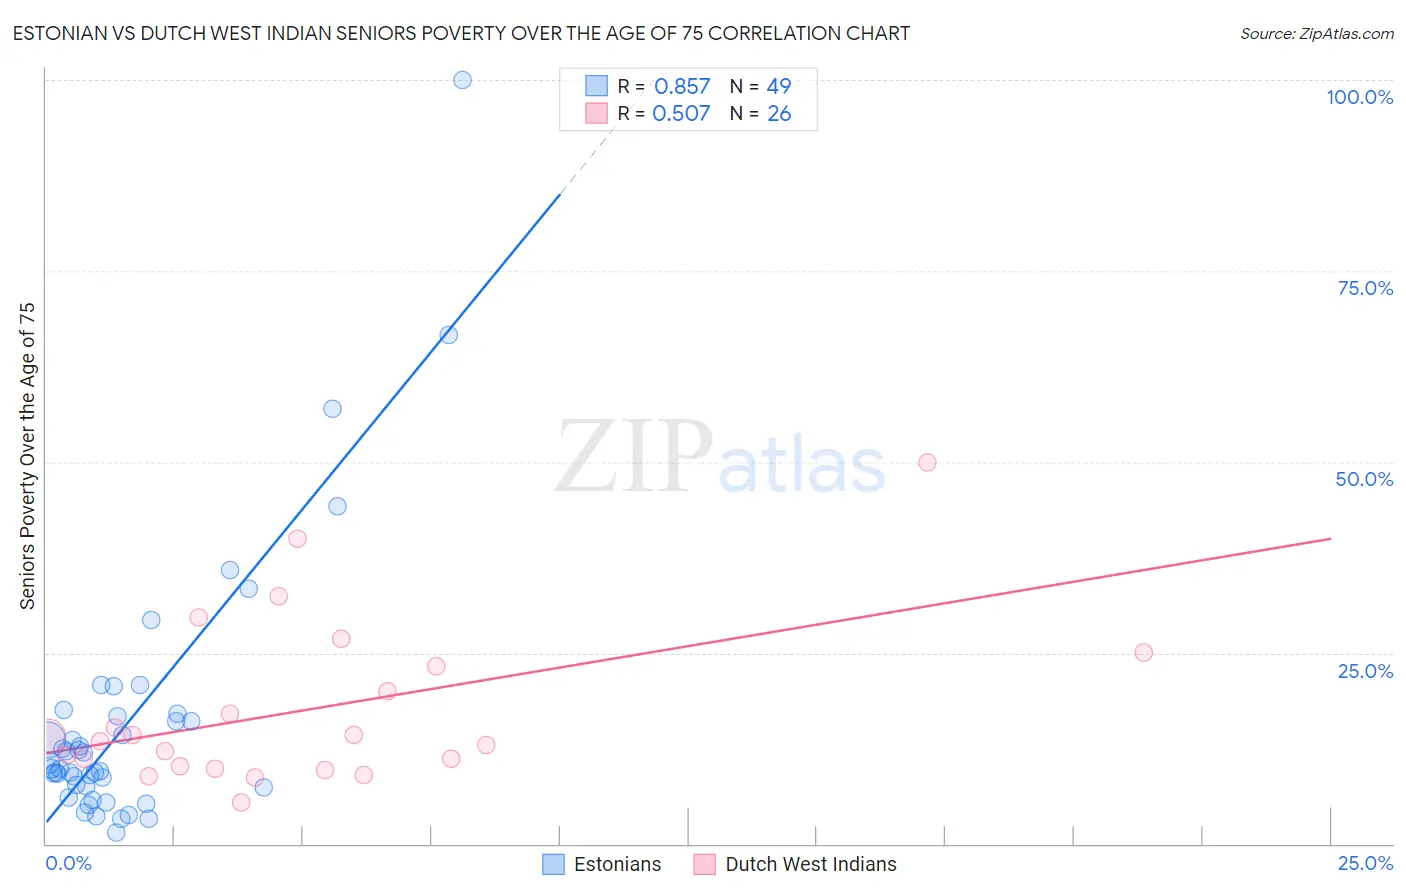 Estonian vs Dutch West Indian Seniors Poverty Over the Age of 75